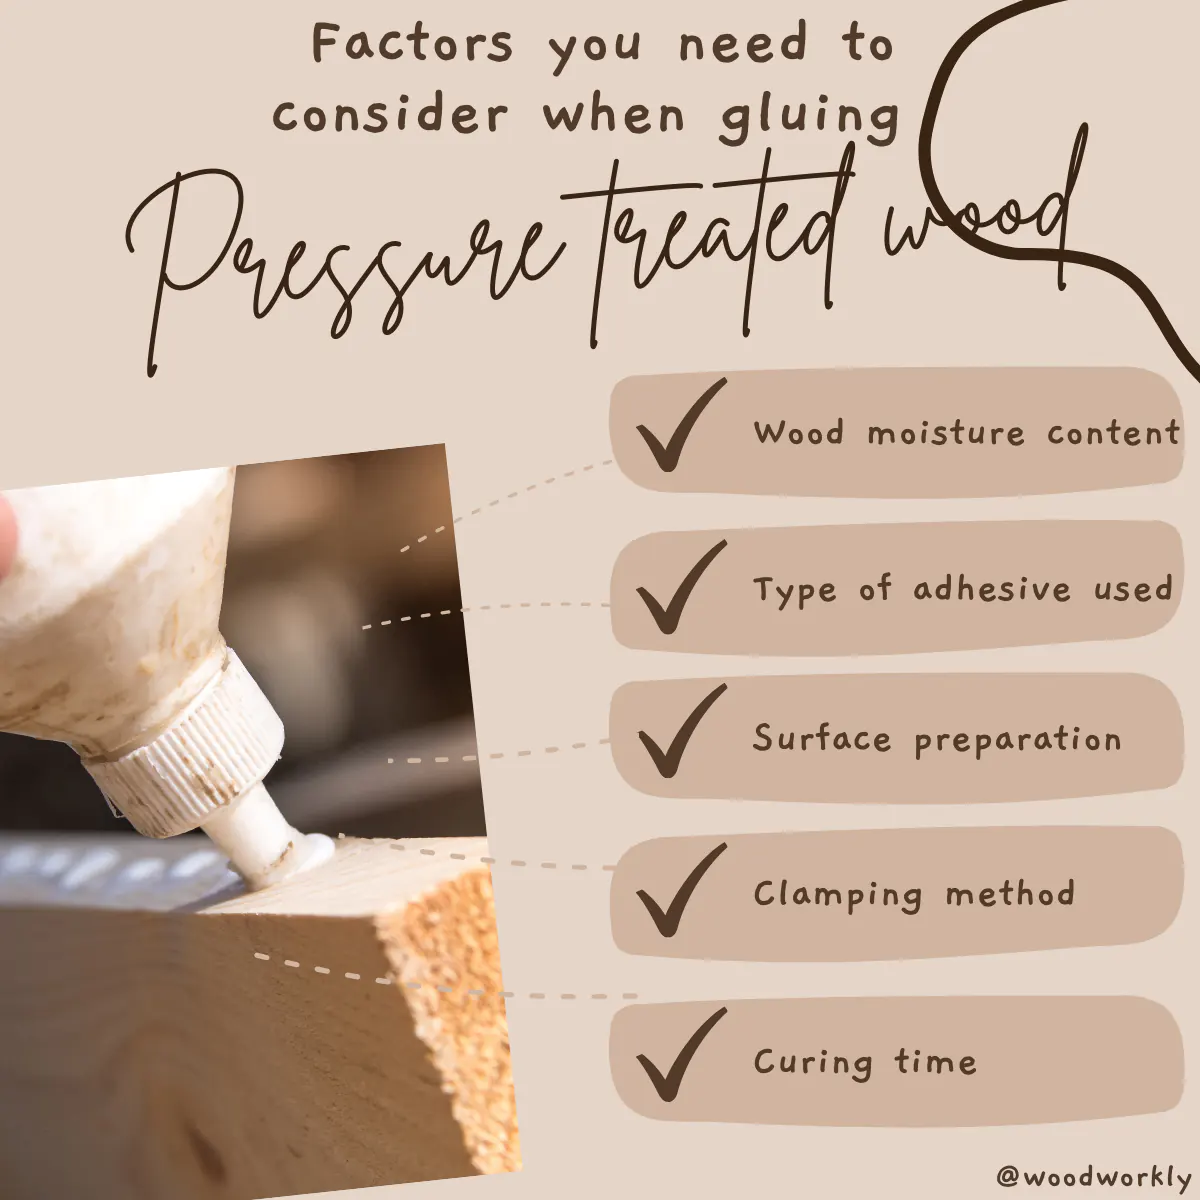 Factors you need to consider when gluing pressure treated wood